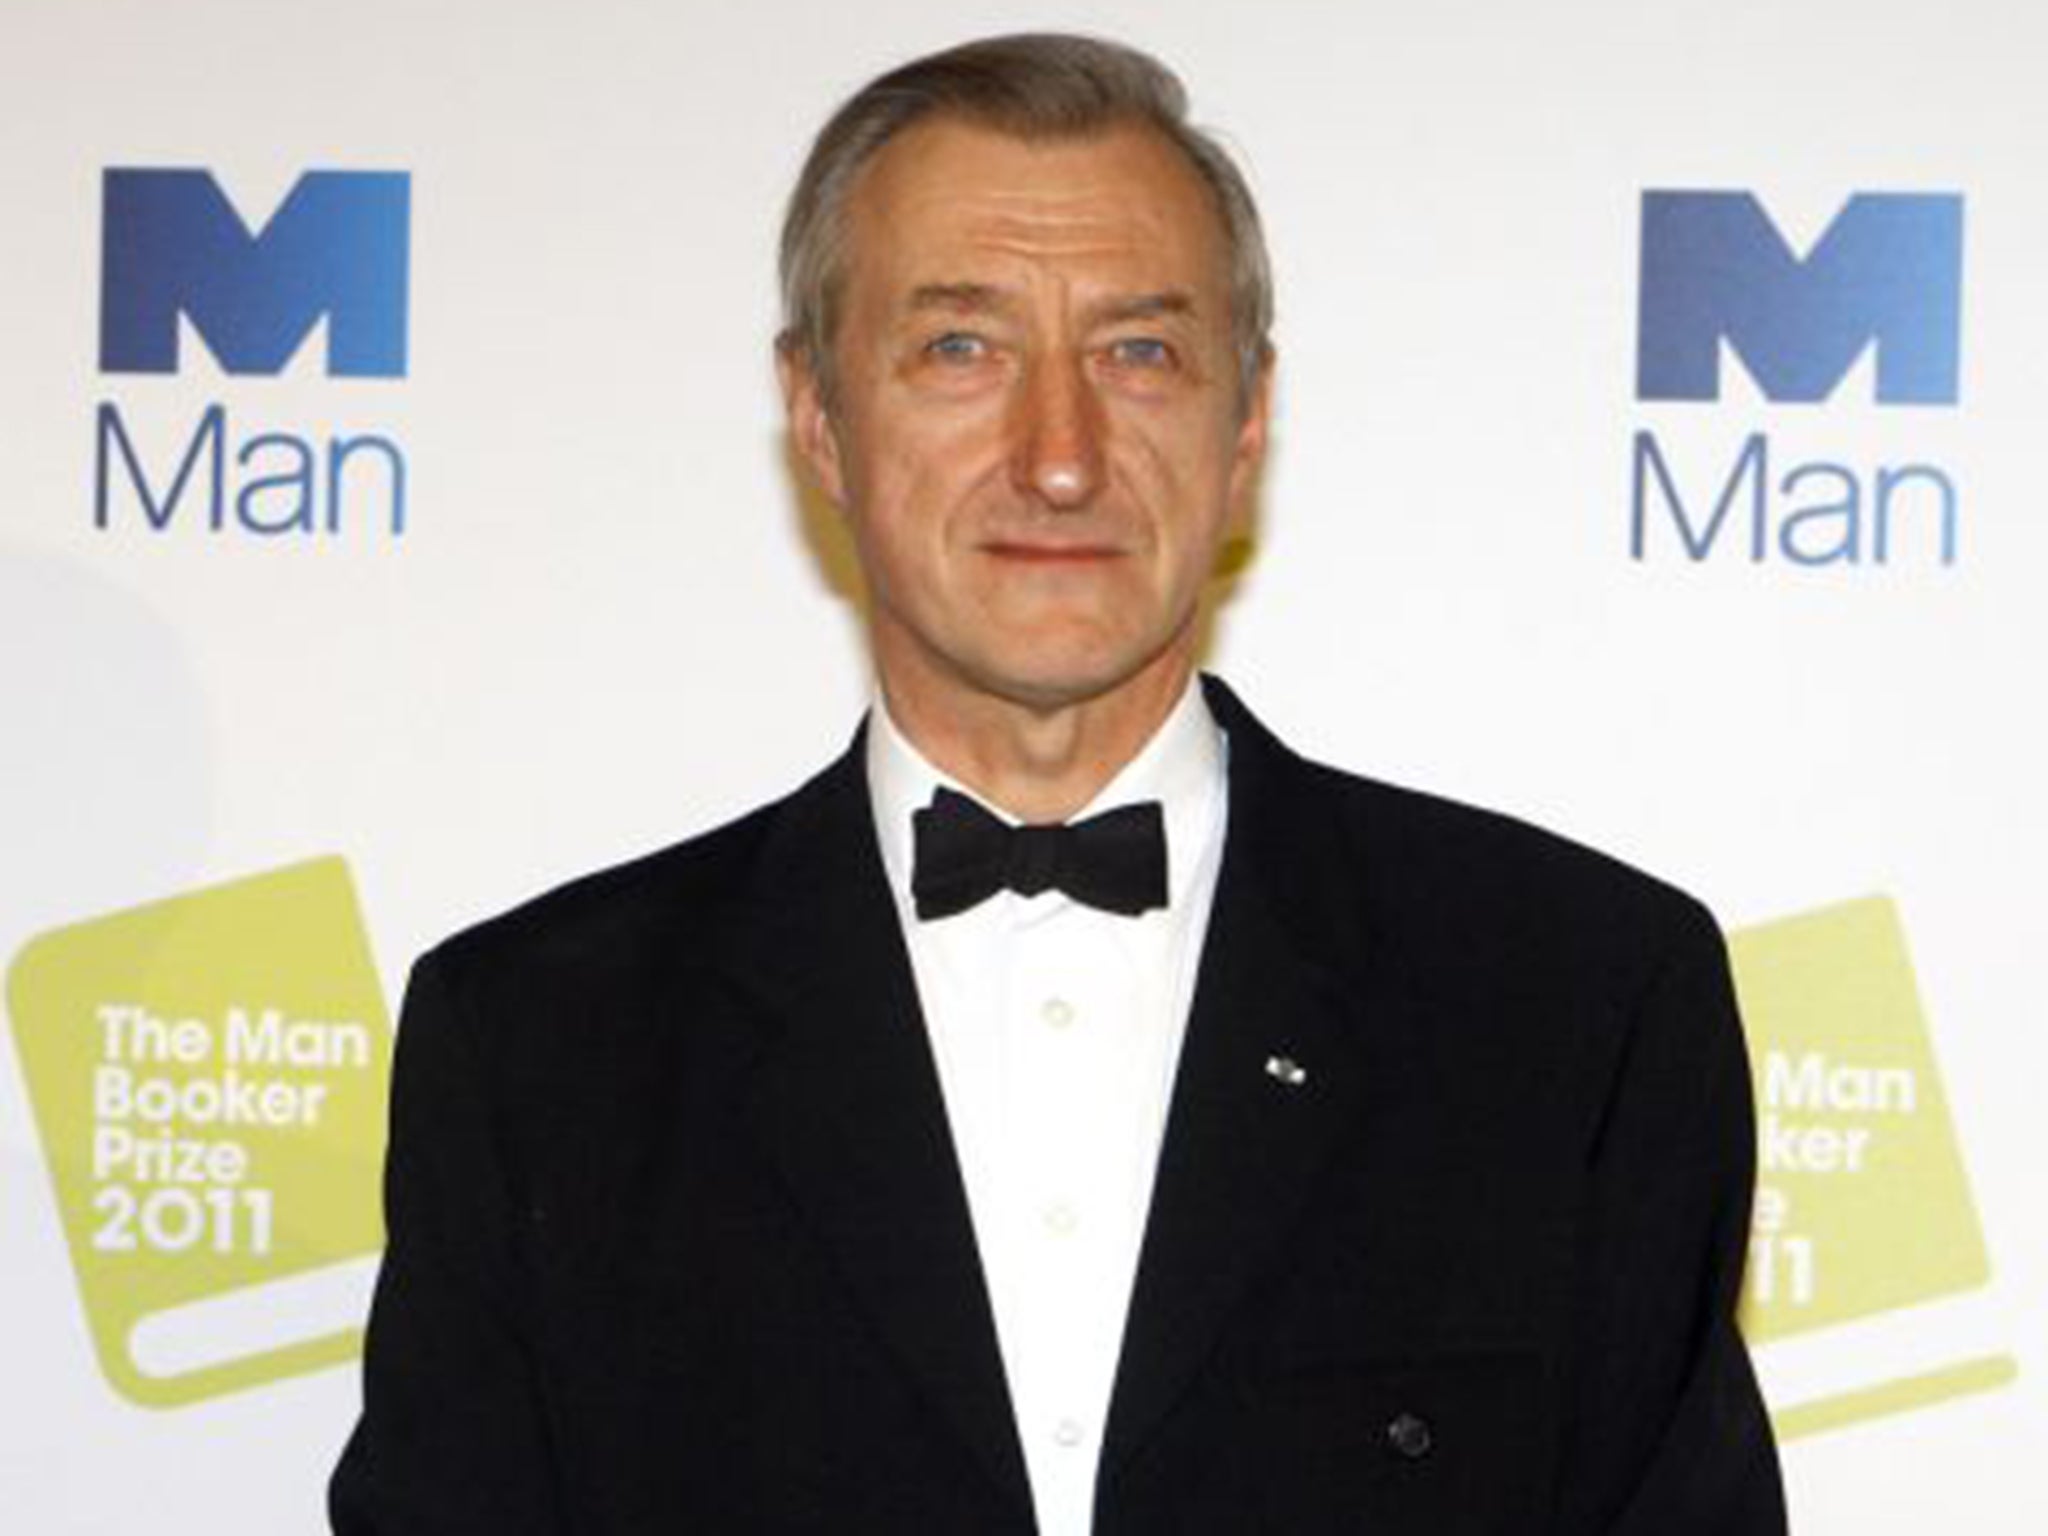 Julian Barnes won the Man Booker Prize in 2011 with The Sense of an Ending